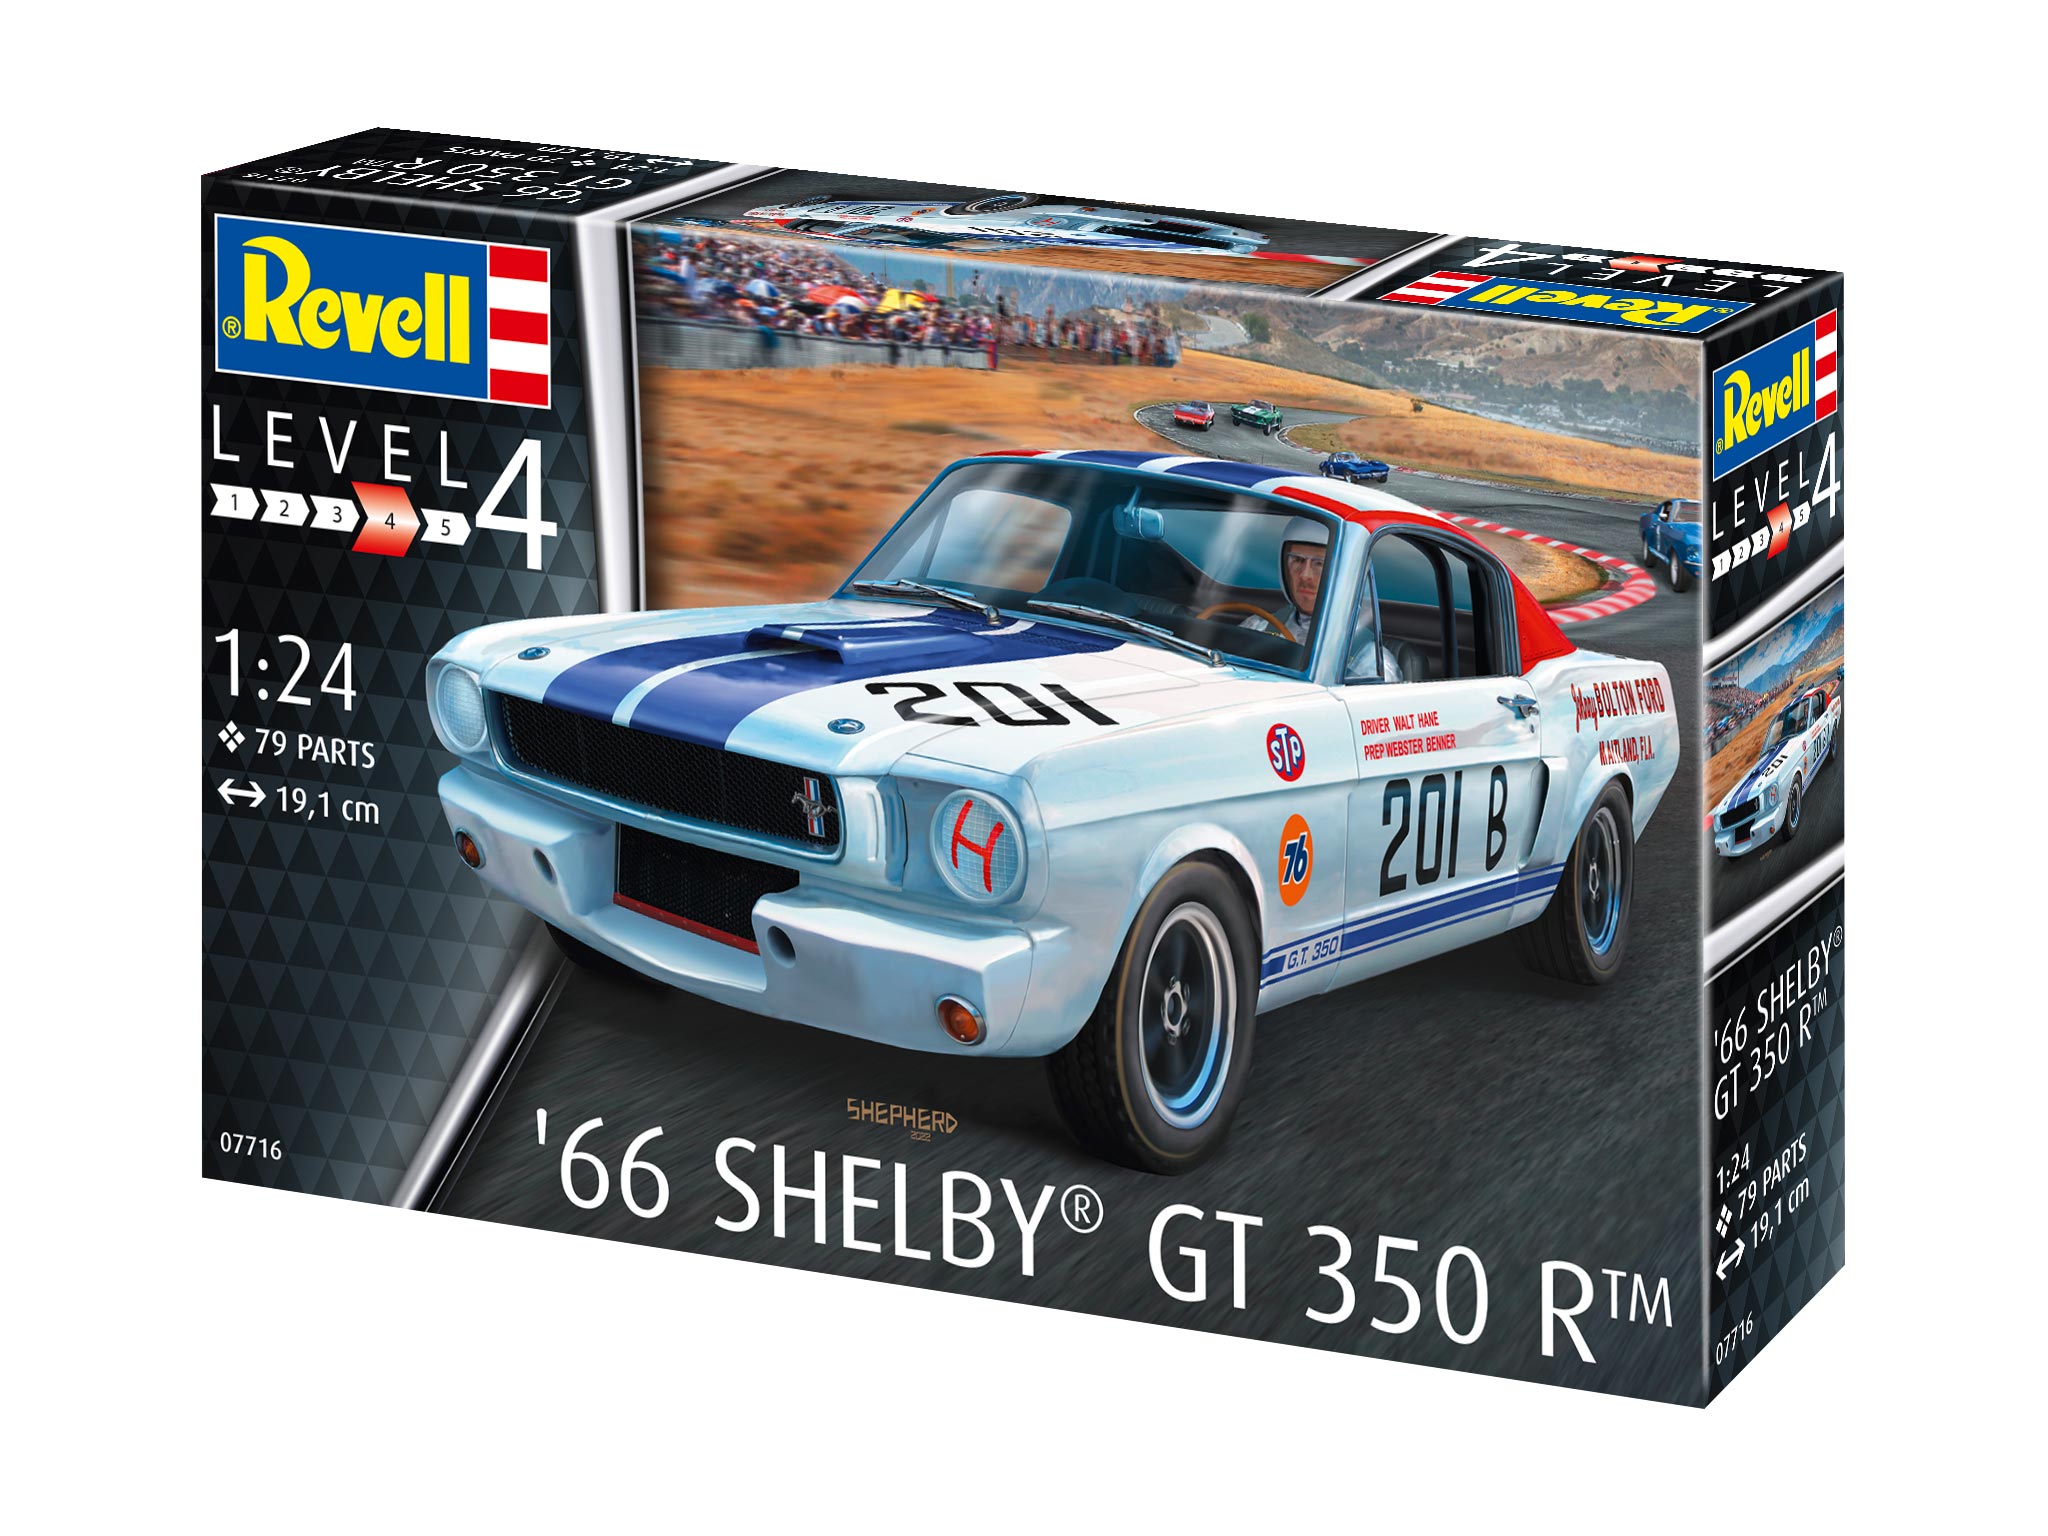 66 Shelby GT 350 R 1:24 Scale Kit